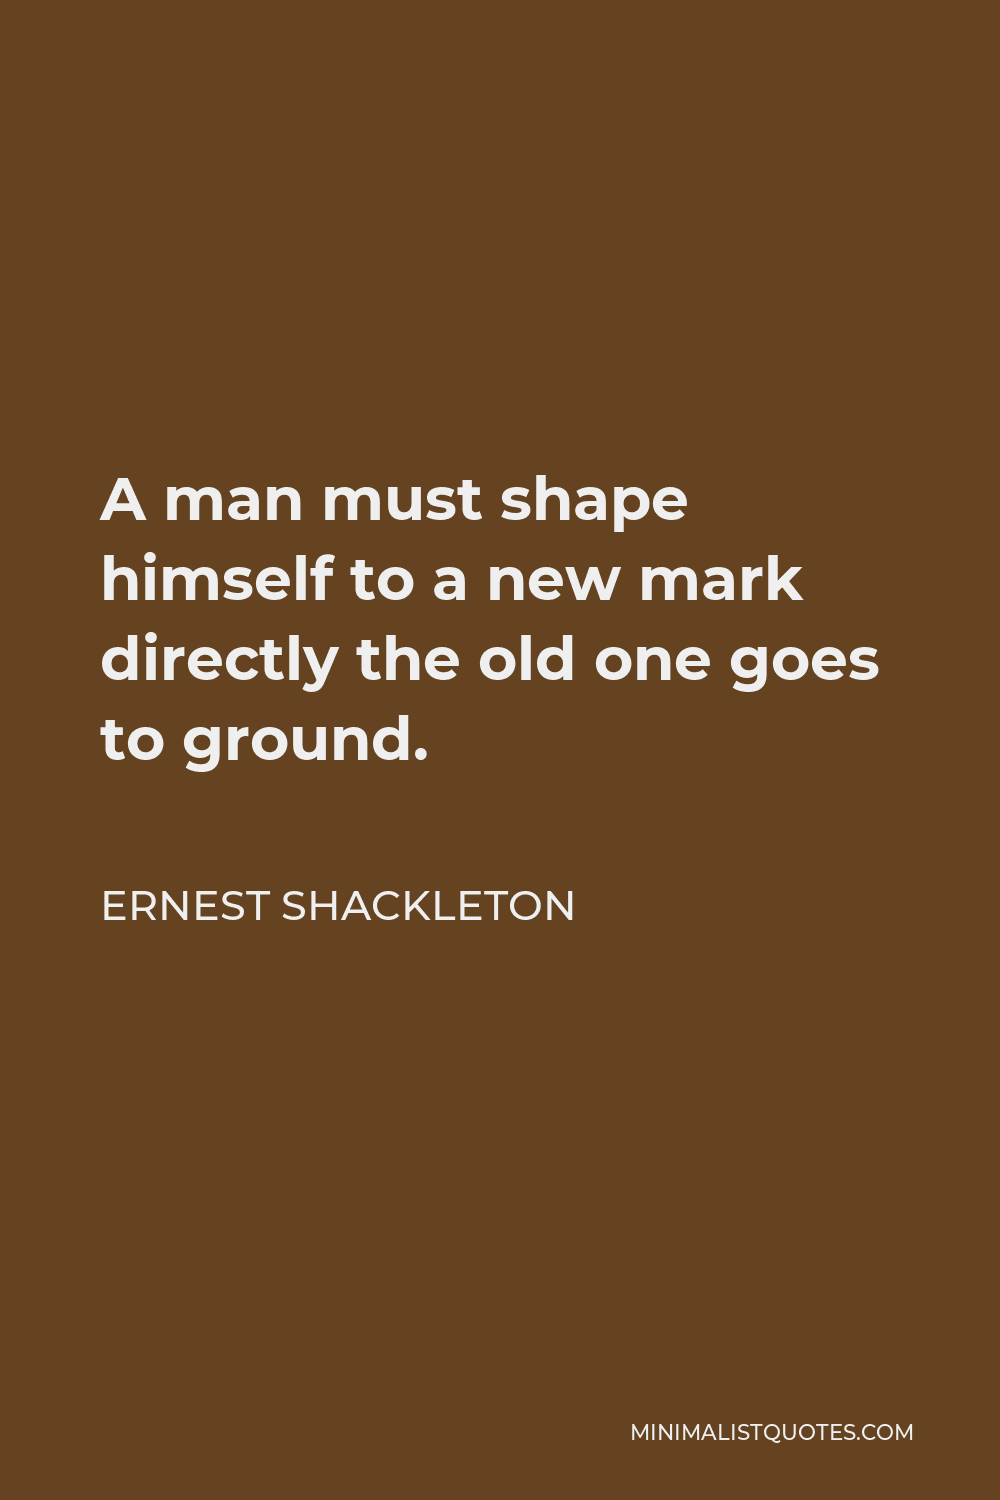 Ernest Shackleton Quote - A man must shape himself to a new mark directly the old one goes to ground.